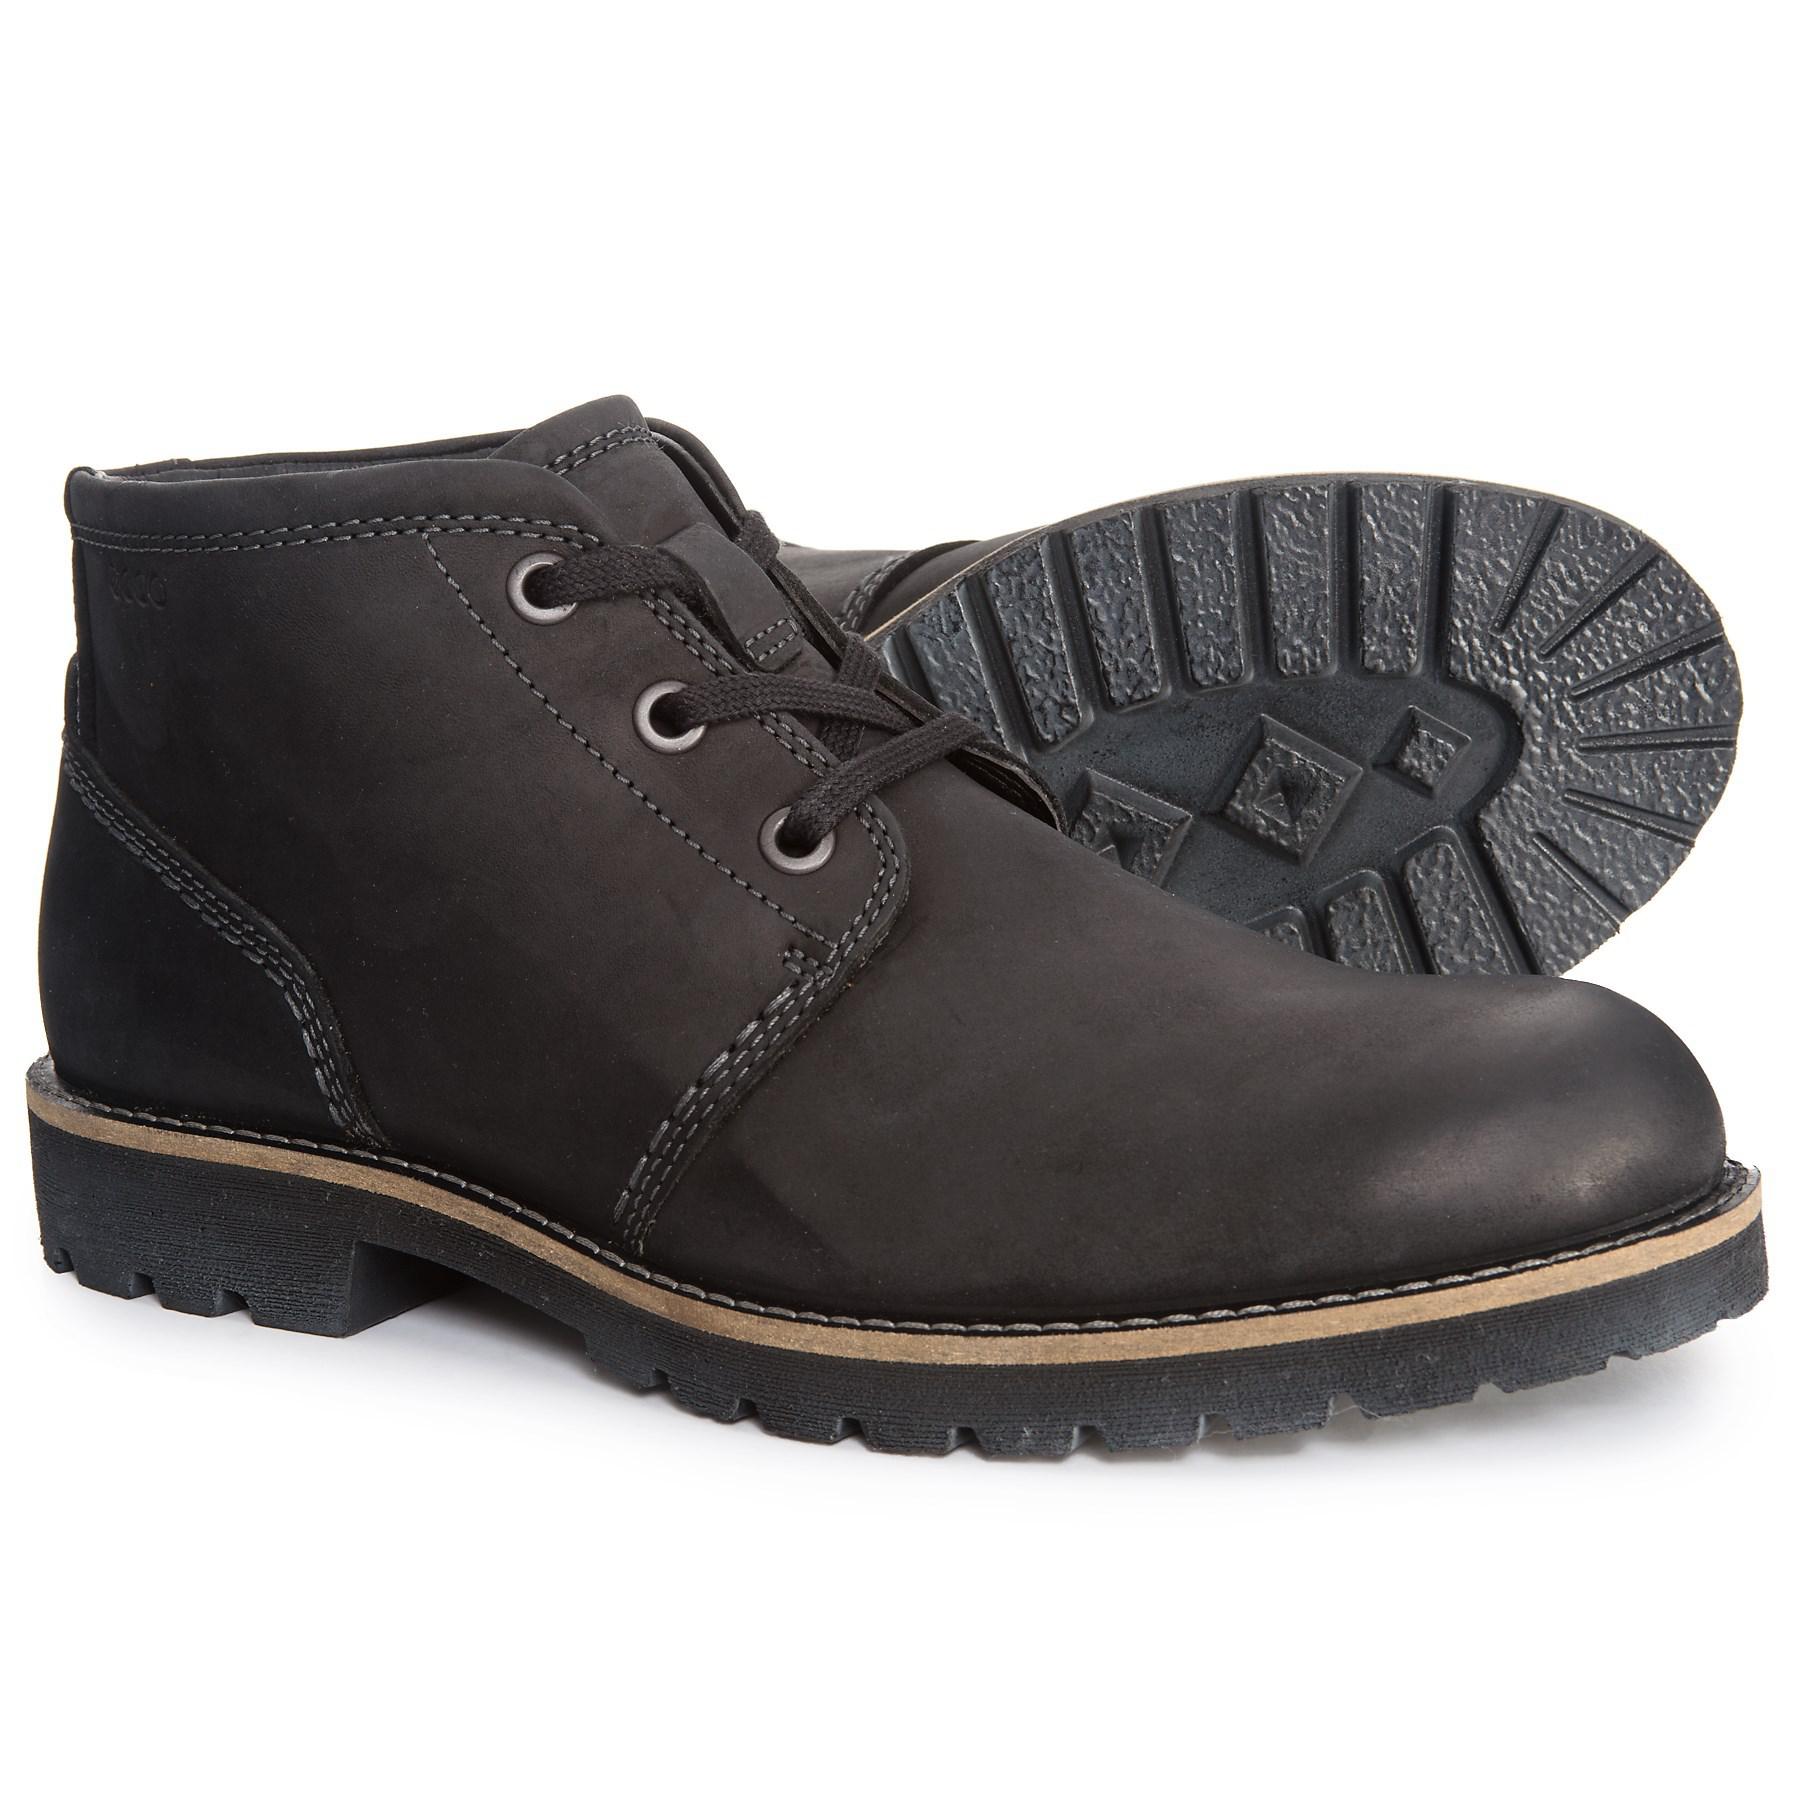 Foresee Bonus smeltet Ecco Leather Jamestown Chukka Boots in Black for Men - Lyst